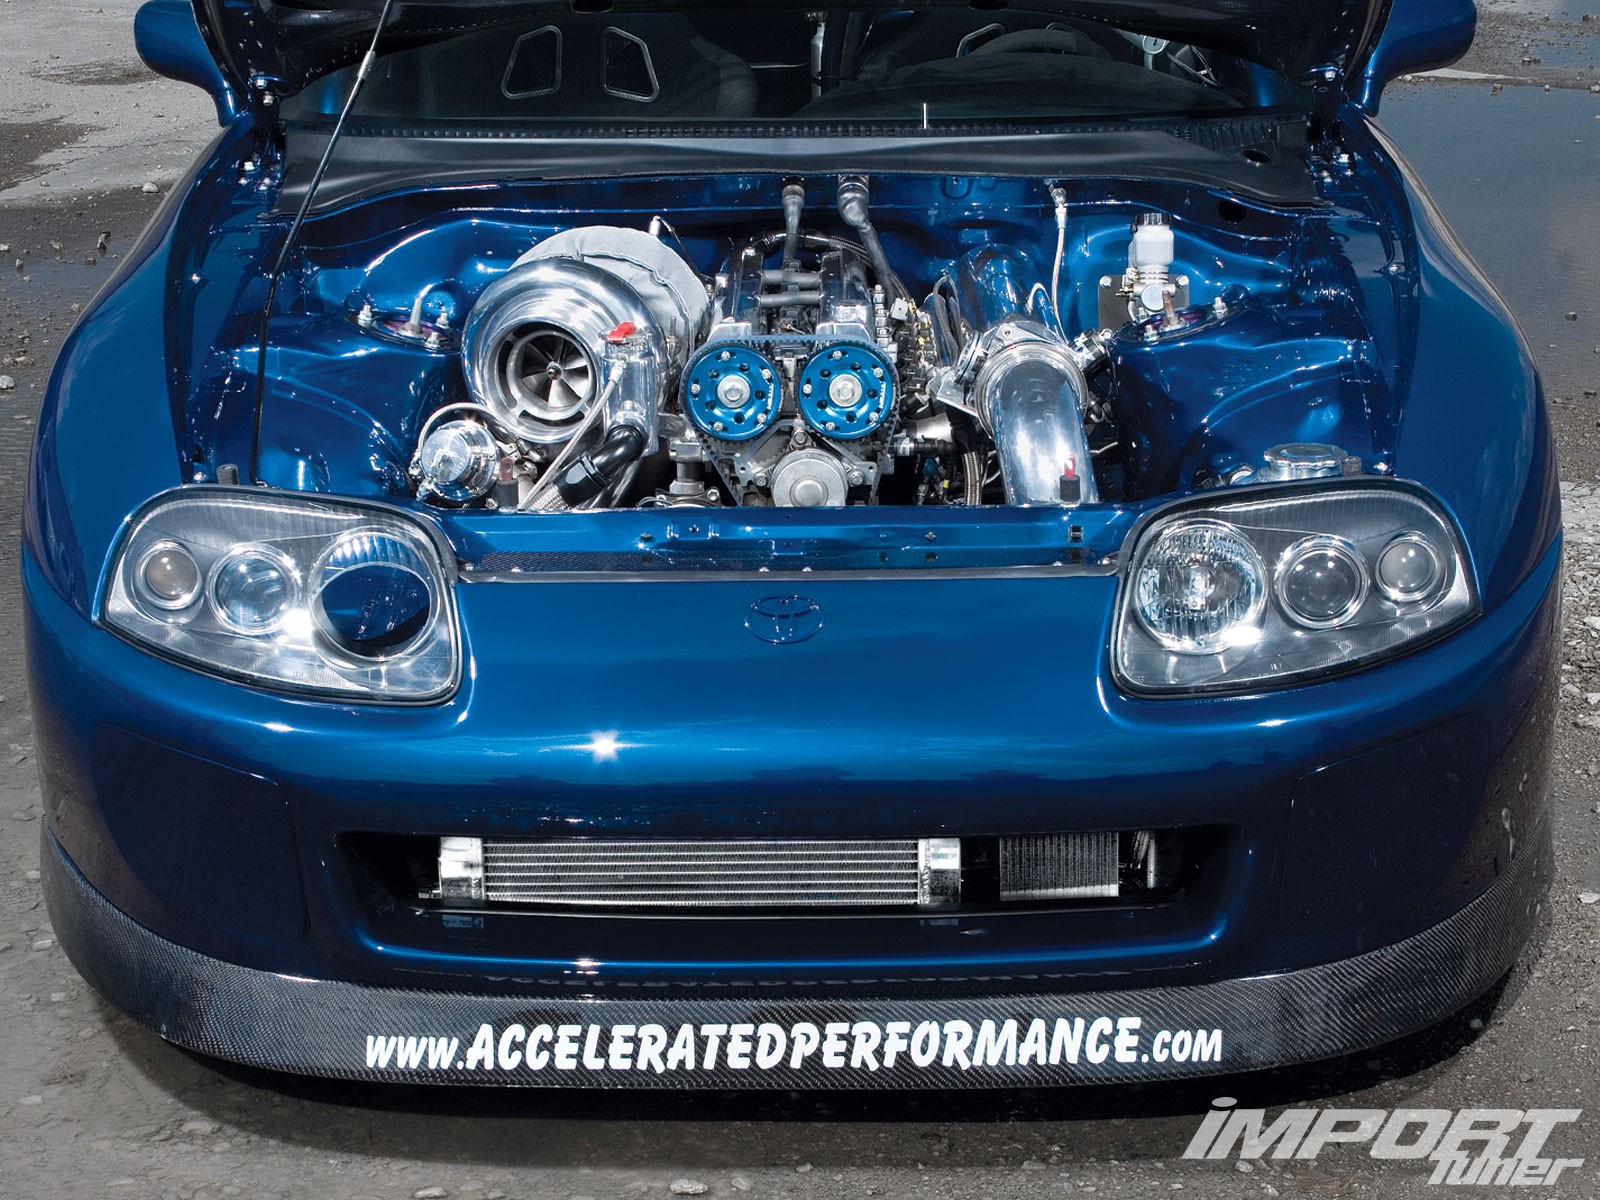 Toyota Supra Toyota Car Blue Cars Engine Engines Frontal View 1600x1200